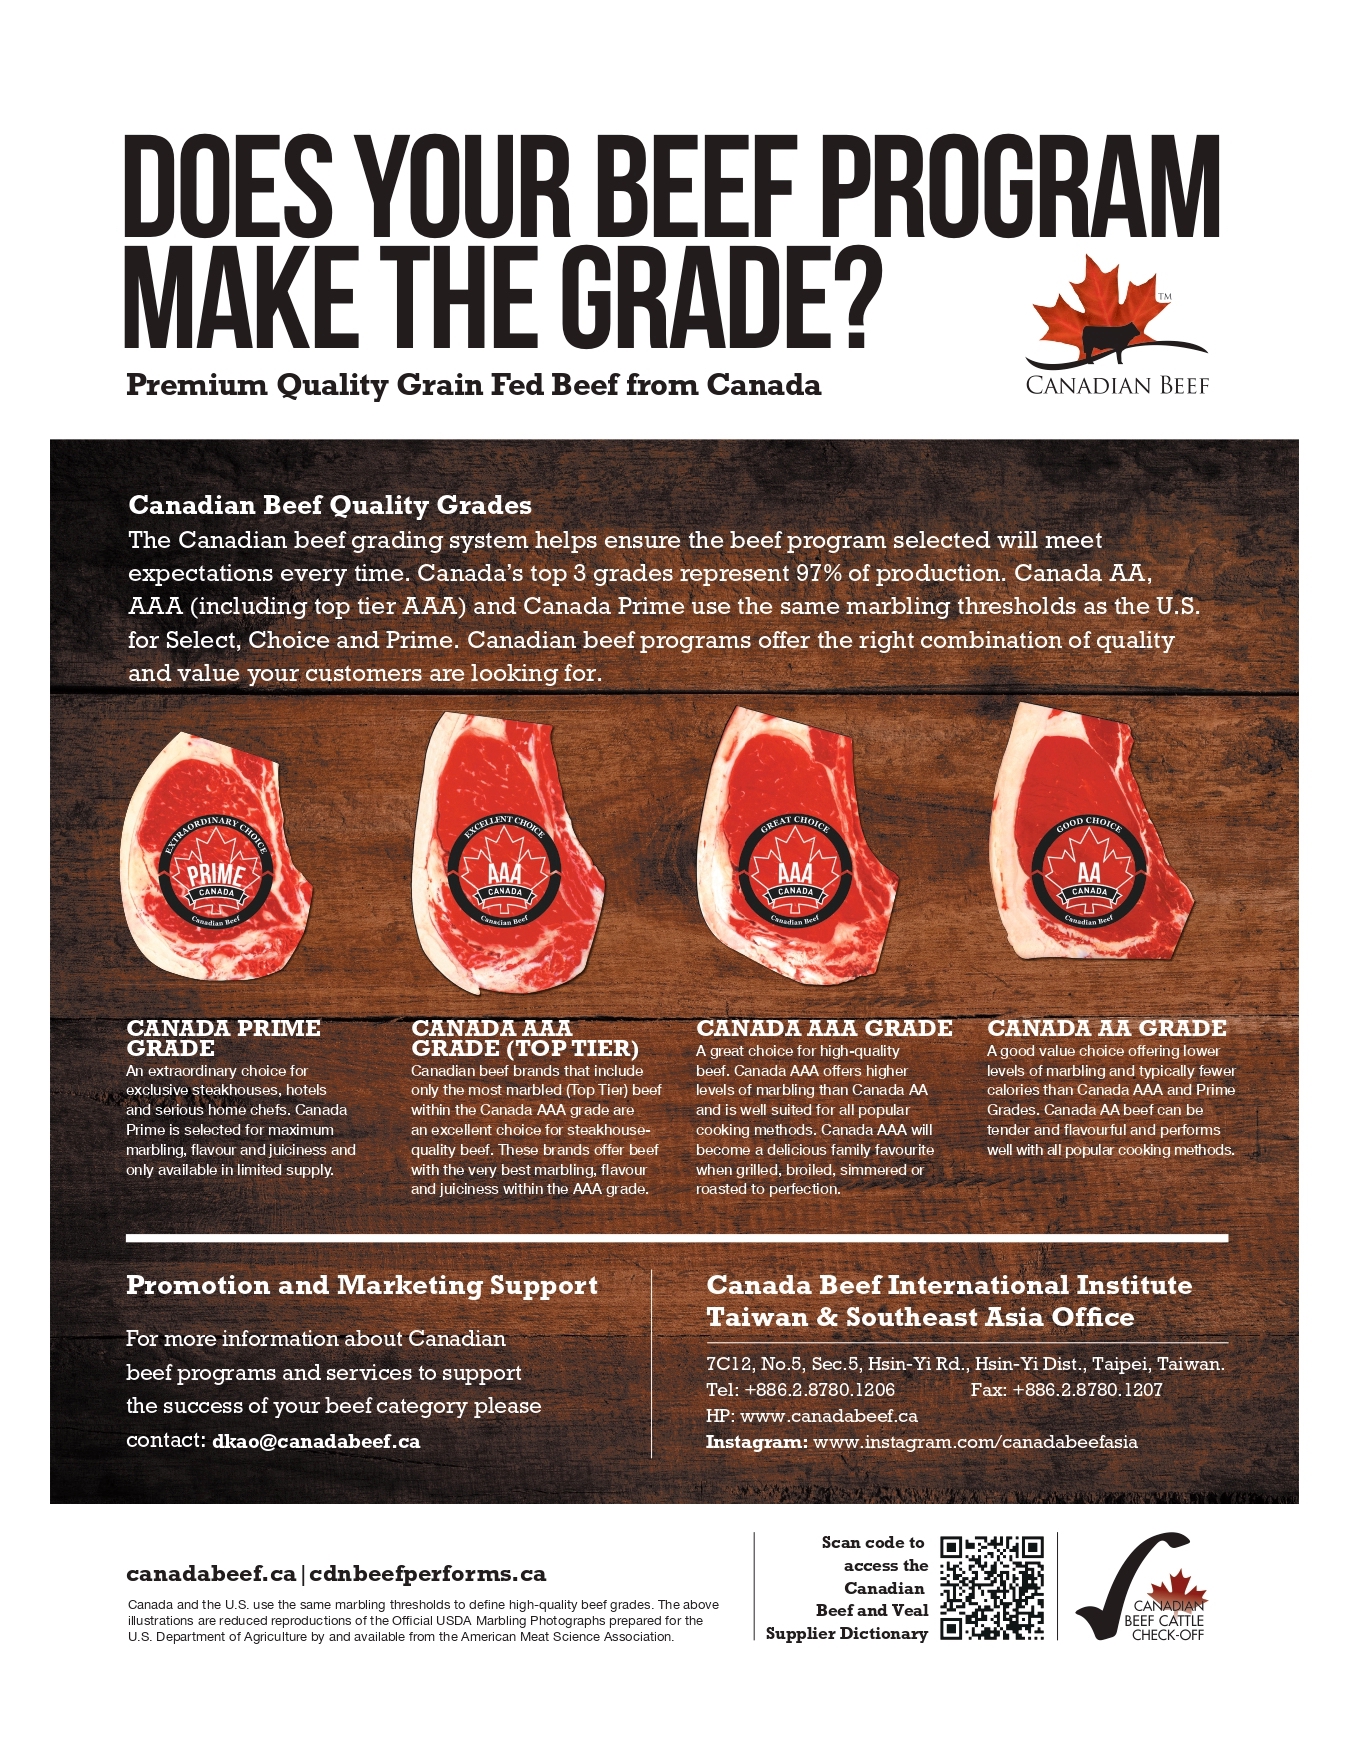 The lowdown on premium quality Canadian beef